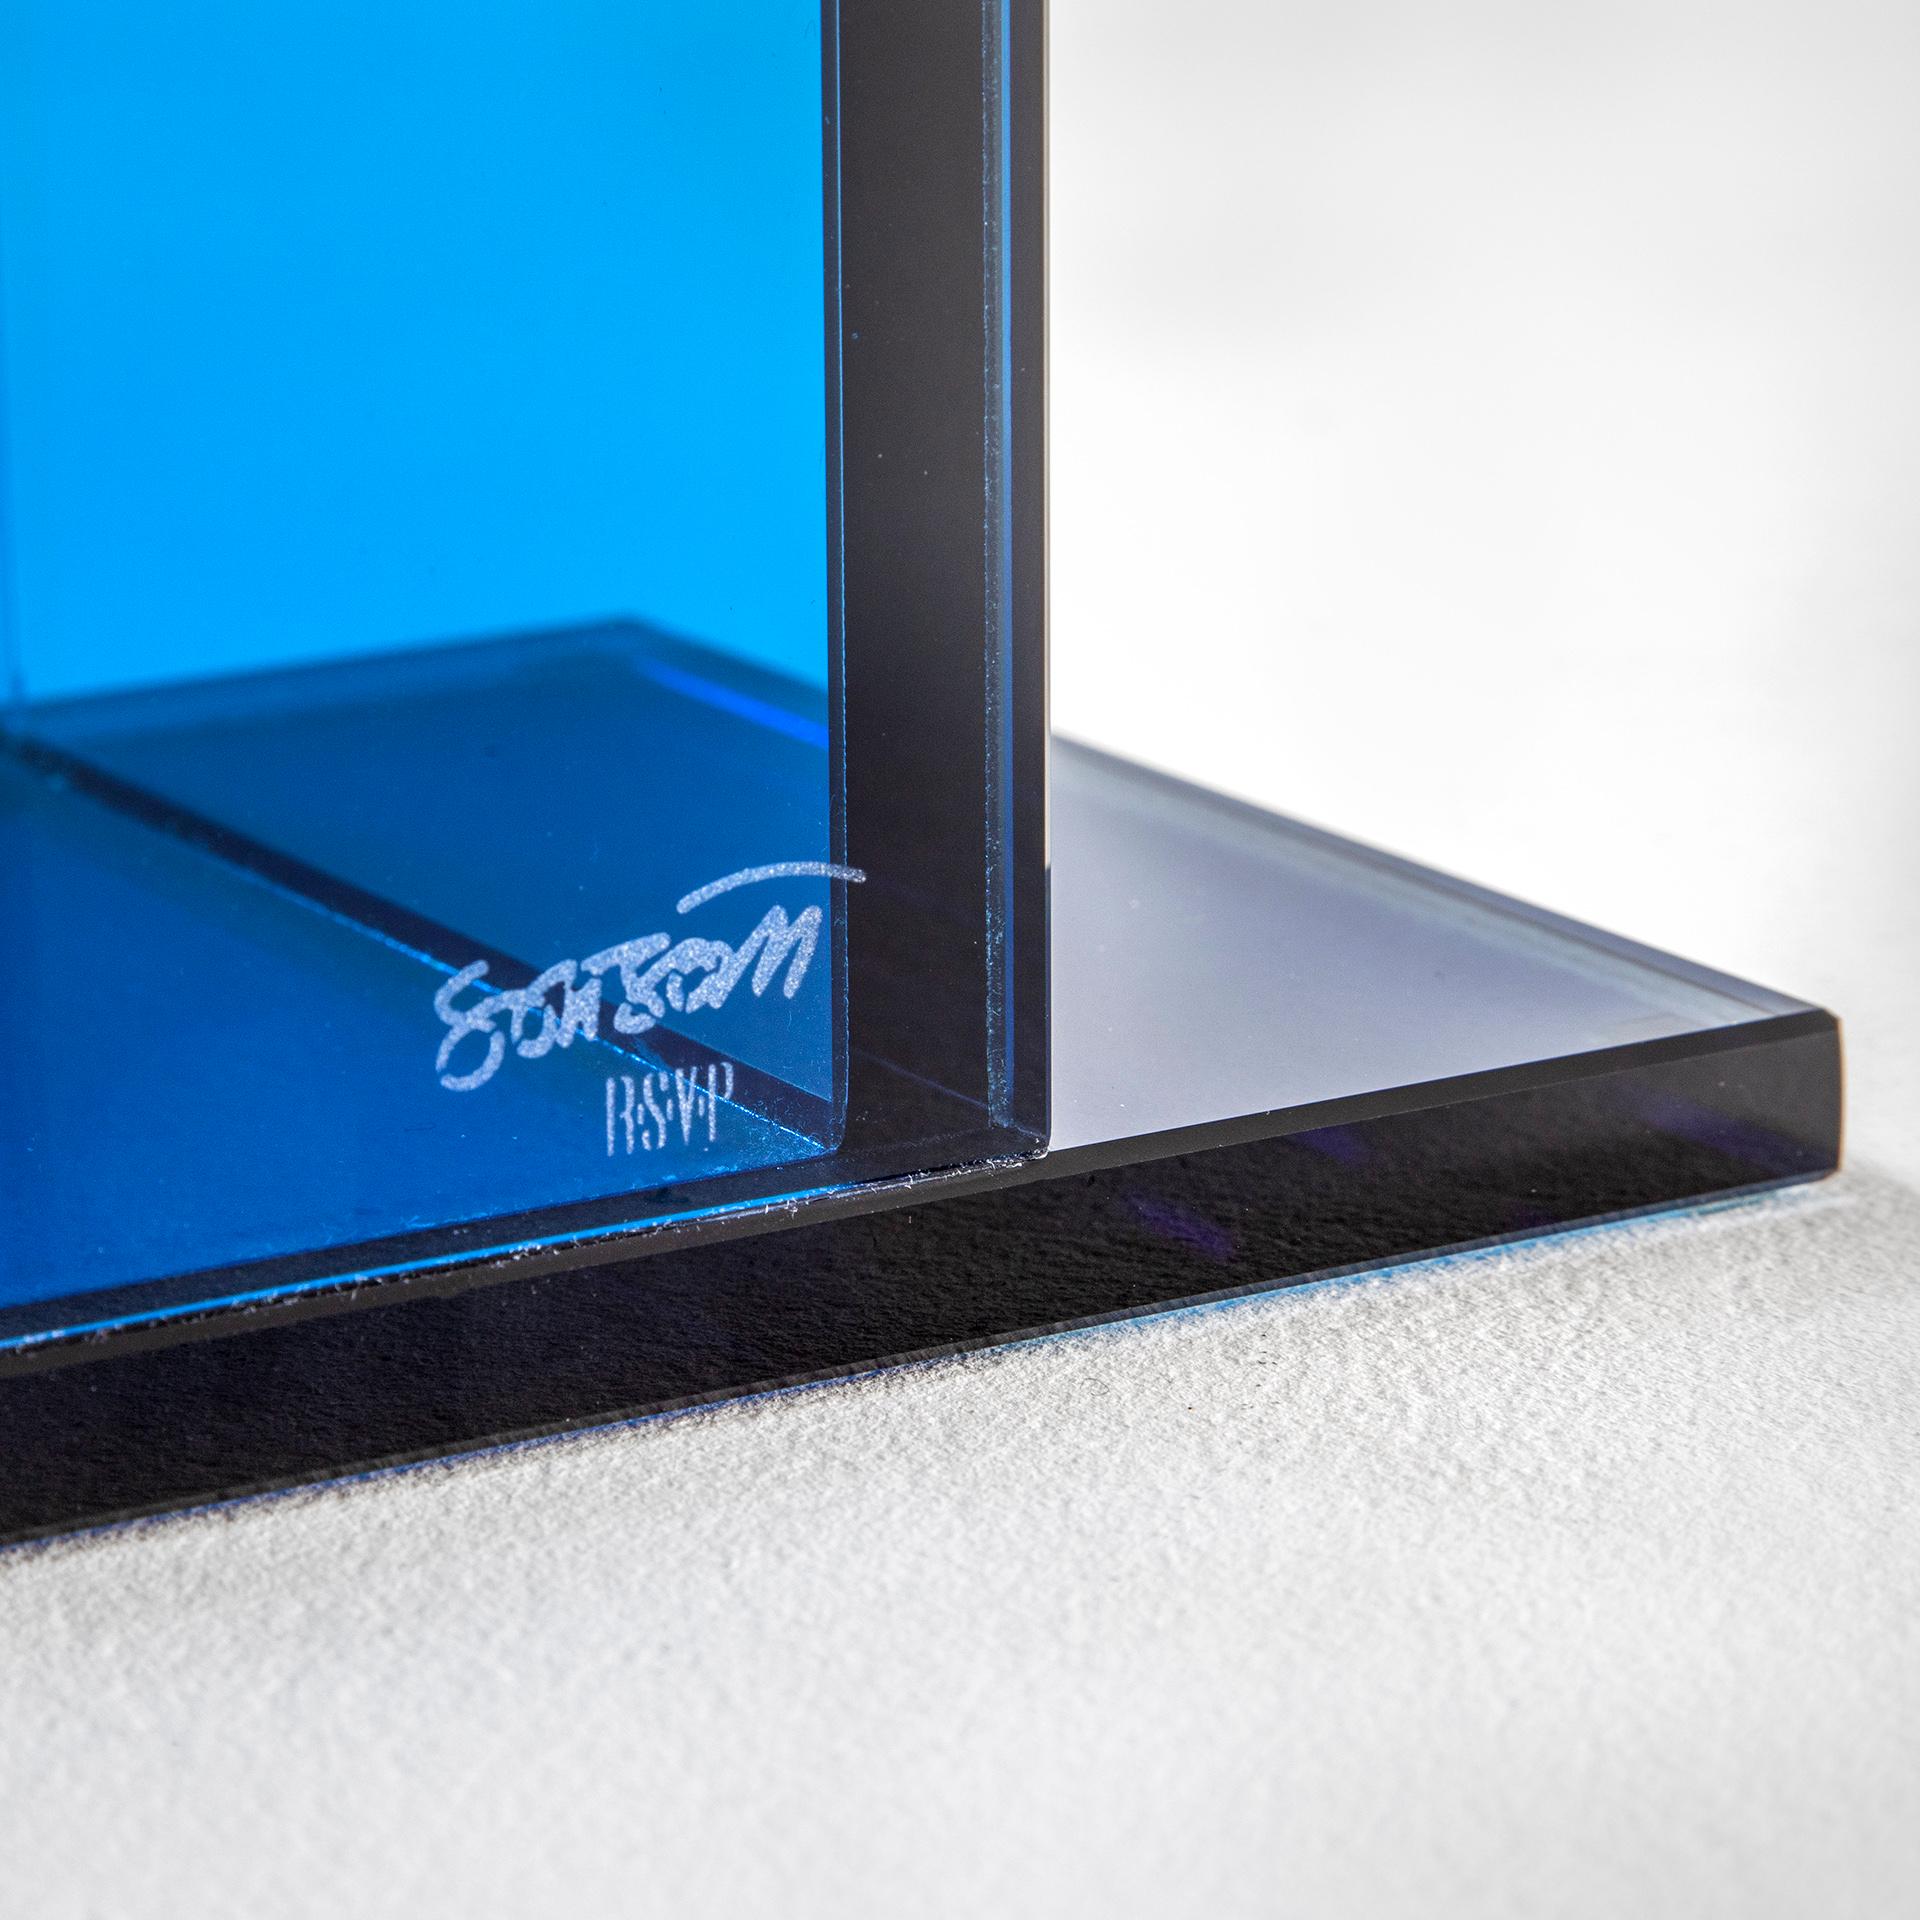 Contemporary 20th Century Ettore Sottsass RSVP Centerpiece Mod. Indigo in Colored Glass For Sale